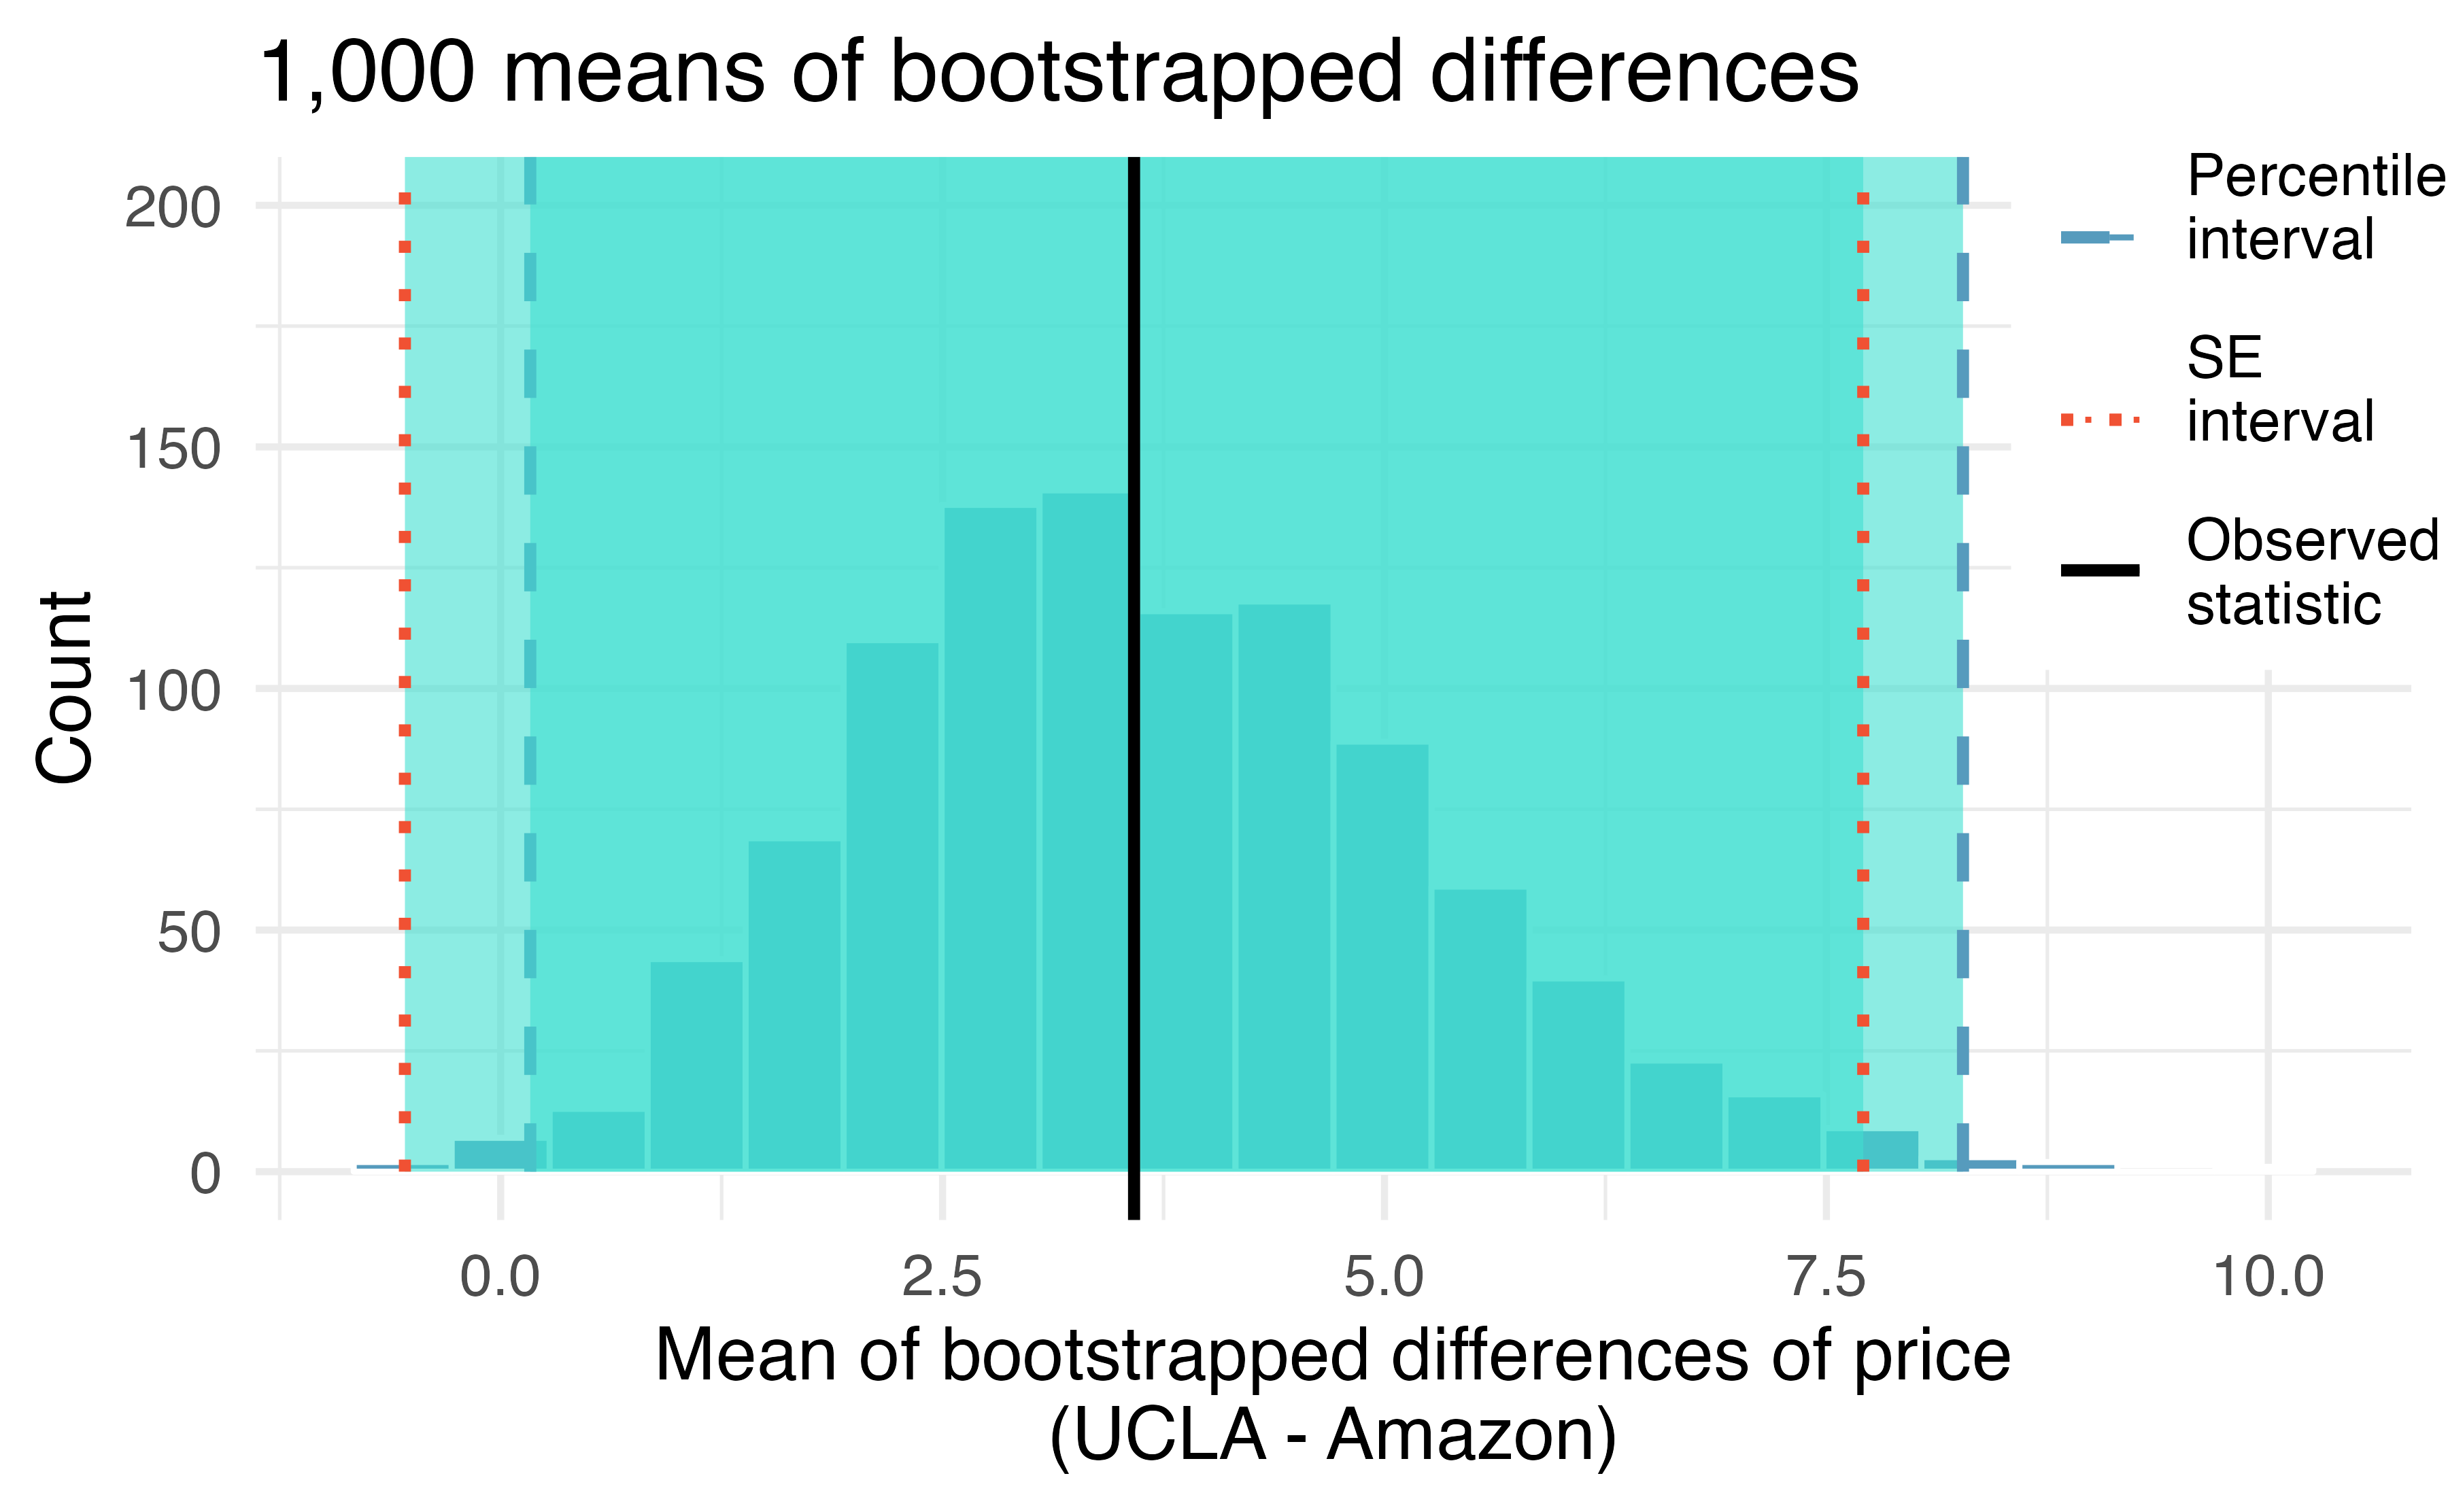 Bootstrap distribution for the average difference in new book price at the UCLA bookstore versus Amazon. 99% confidence intervals are superimposed using blue dashed (bootstrap percentile interval) and red dotted (bootstrap SE interval) lines.